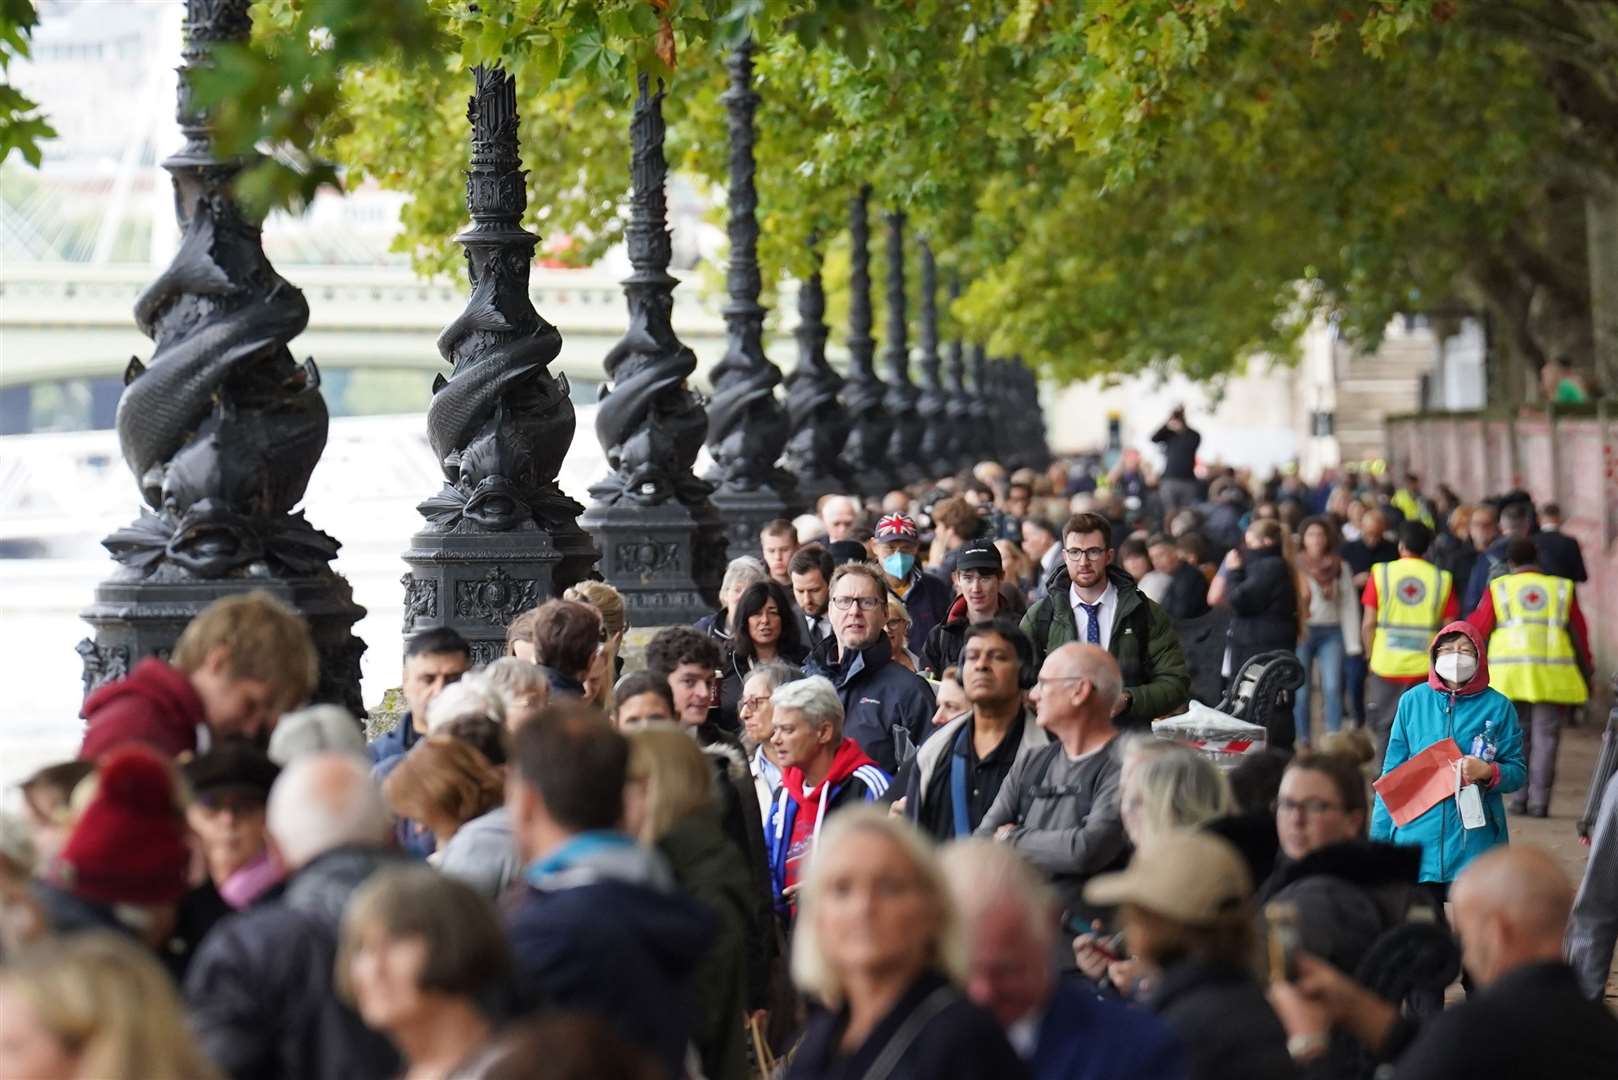 Members of the public join the queue on the South Bank, as they wait to view the Queen lying in state ahead of her funeral on Monday (Stefan Rousseau/PA)